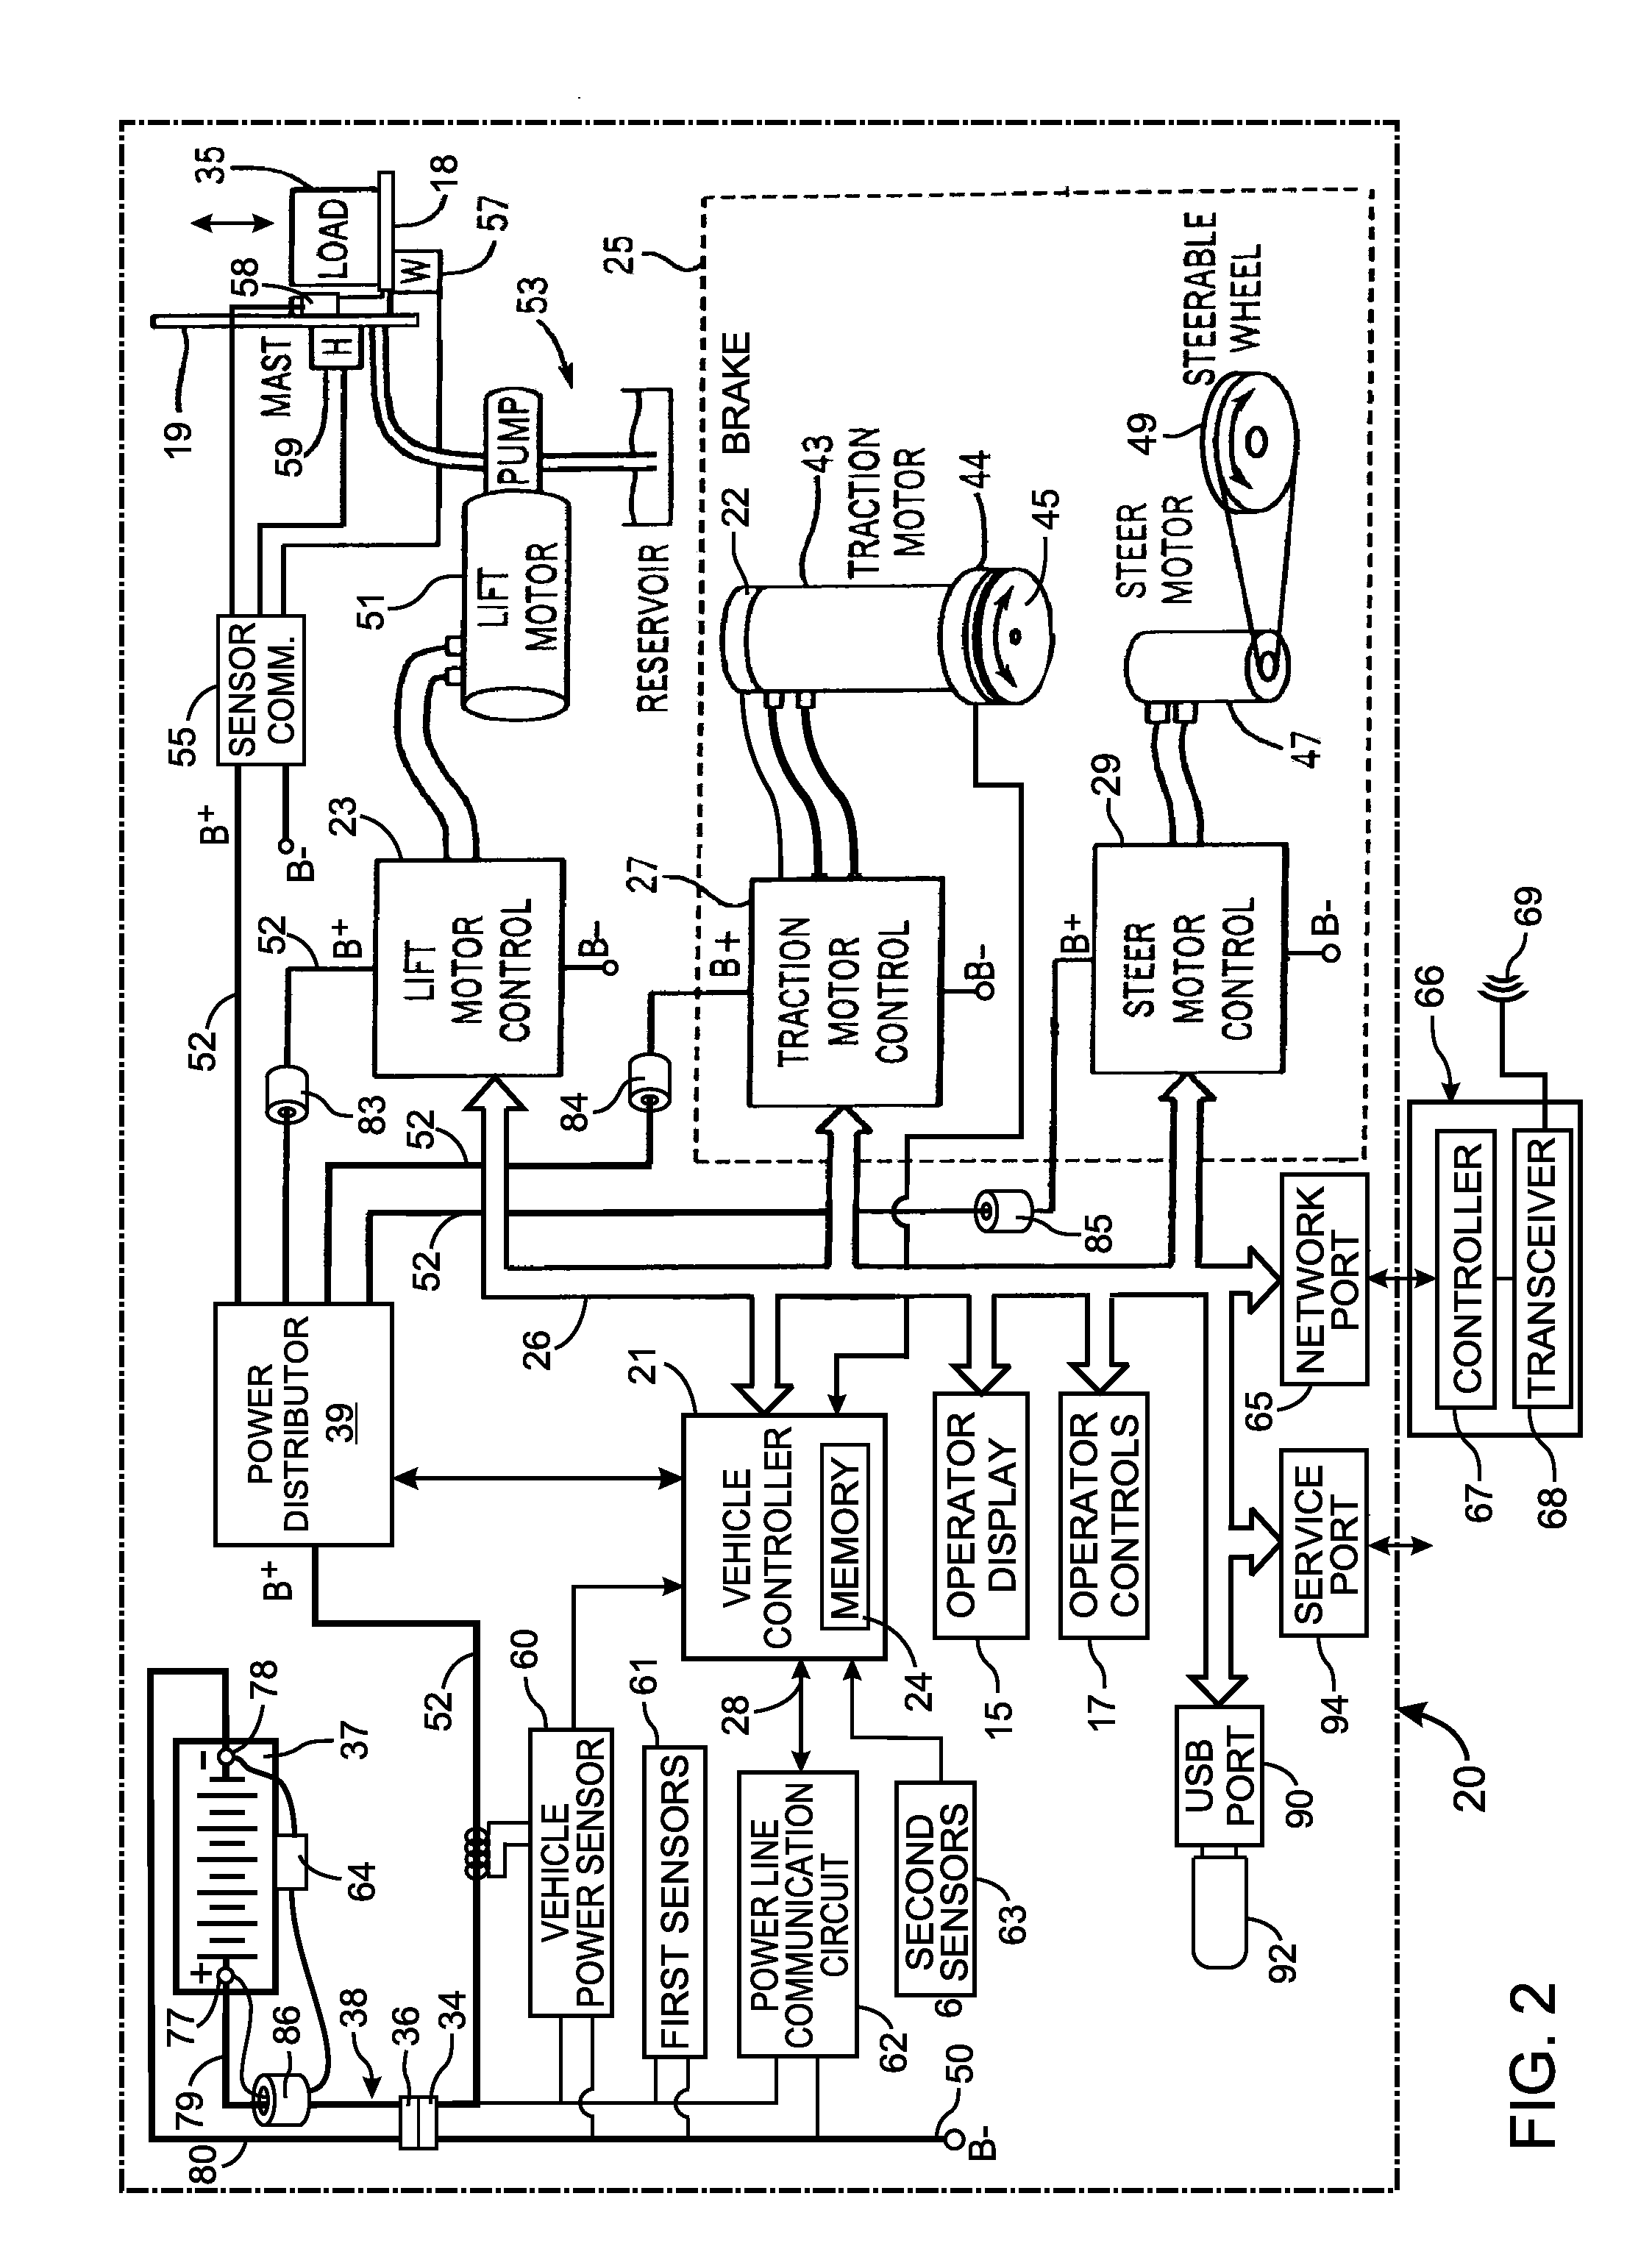 System for gathering data from an industrial vehicle